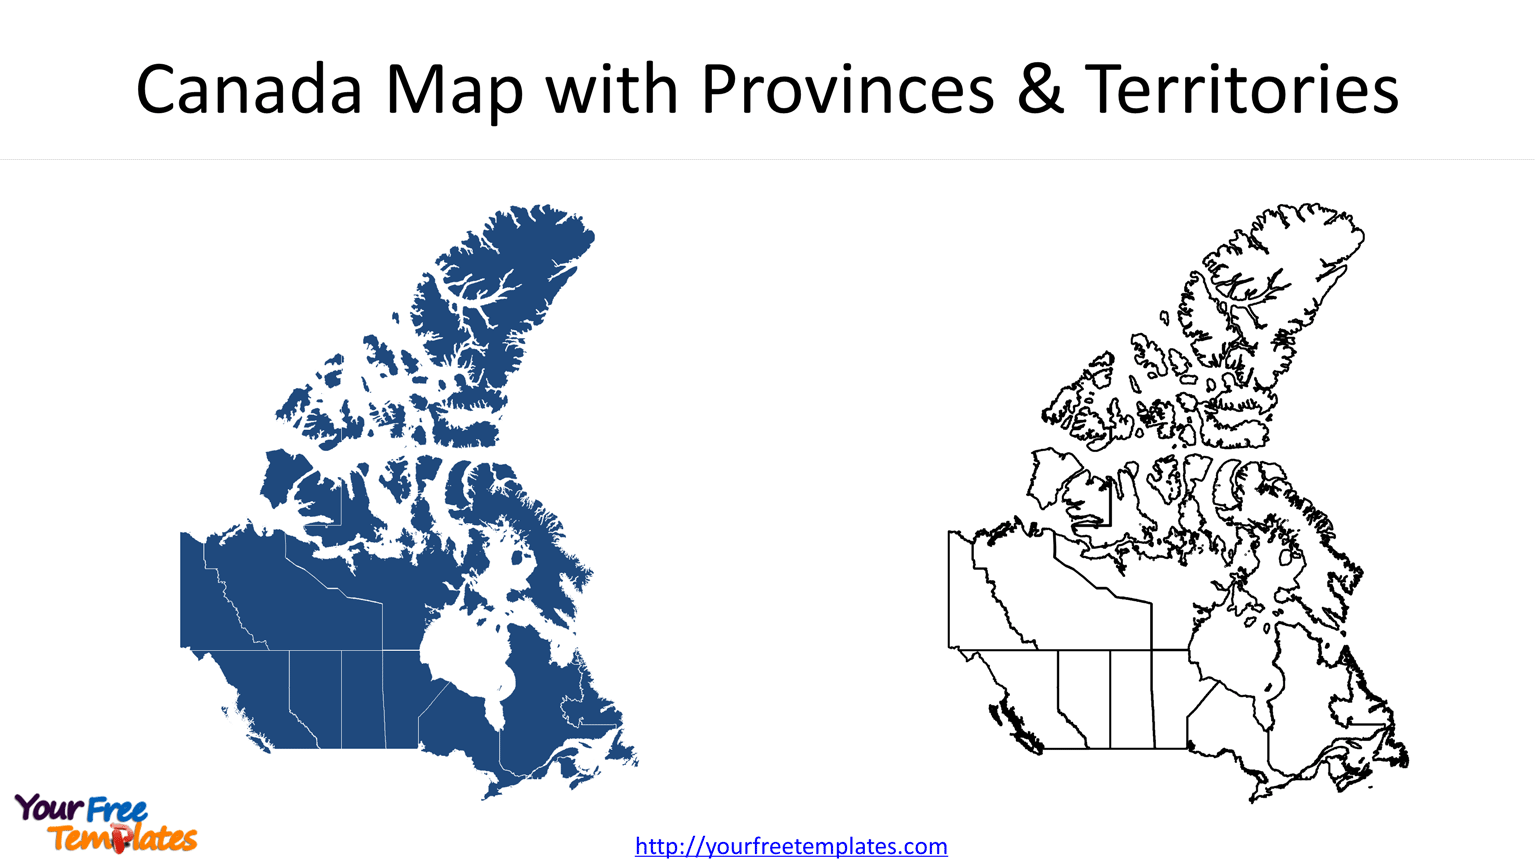 Canada province map